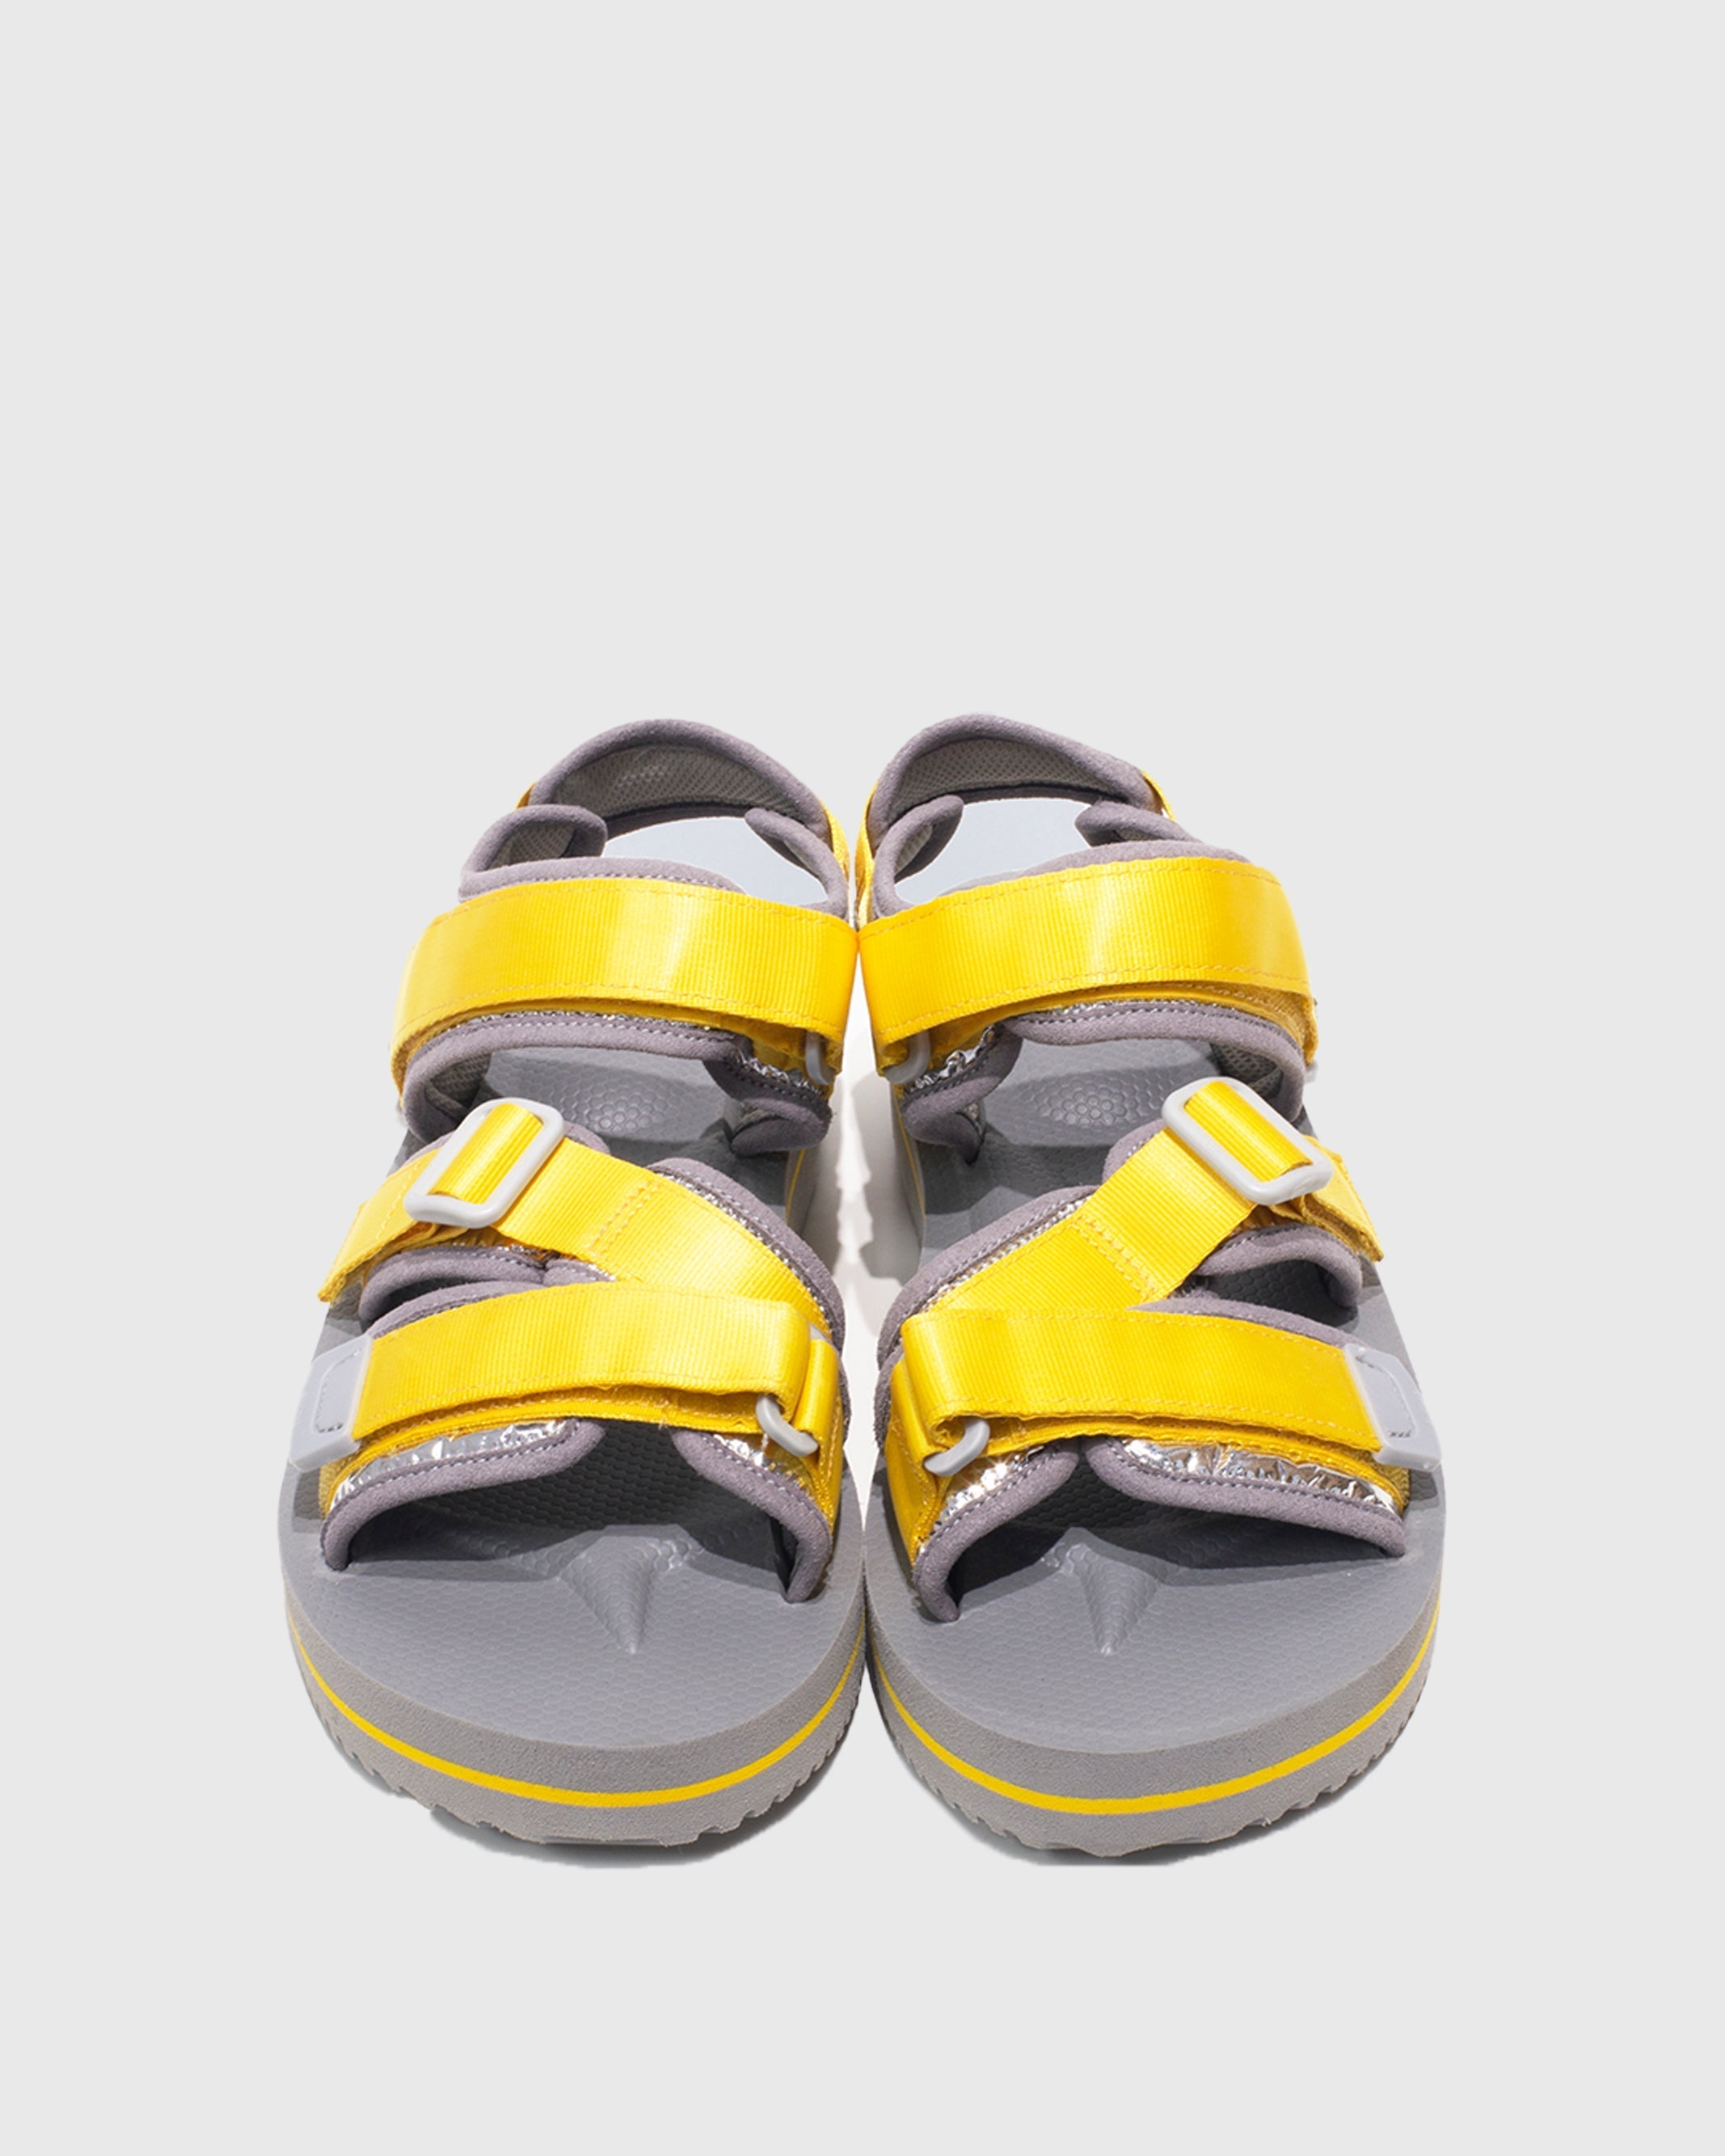 SUICOKE KISEE-VEU3 in Yellow OG-044VEU3 | Shop from eightywingold an official brand partner for SUICOKE Canada and US.